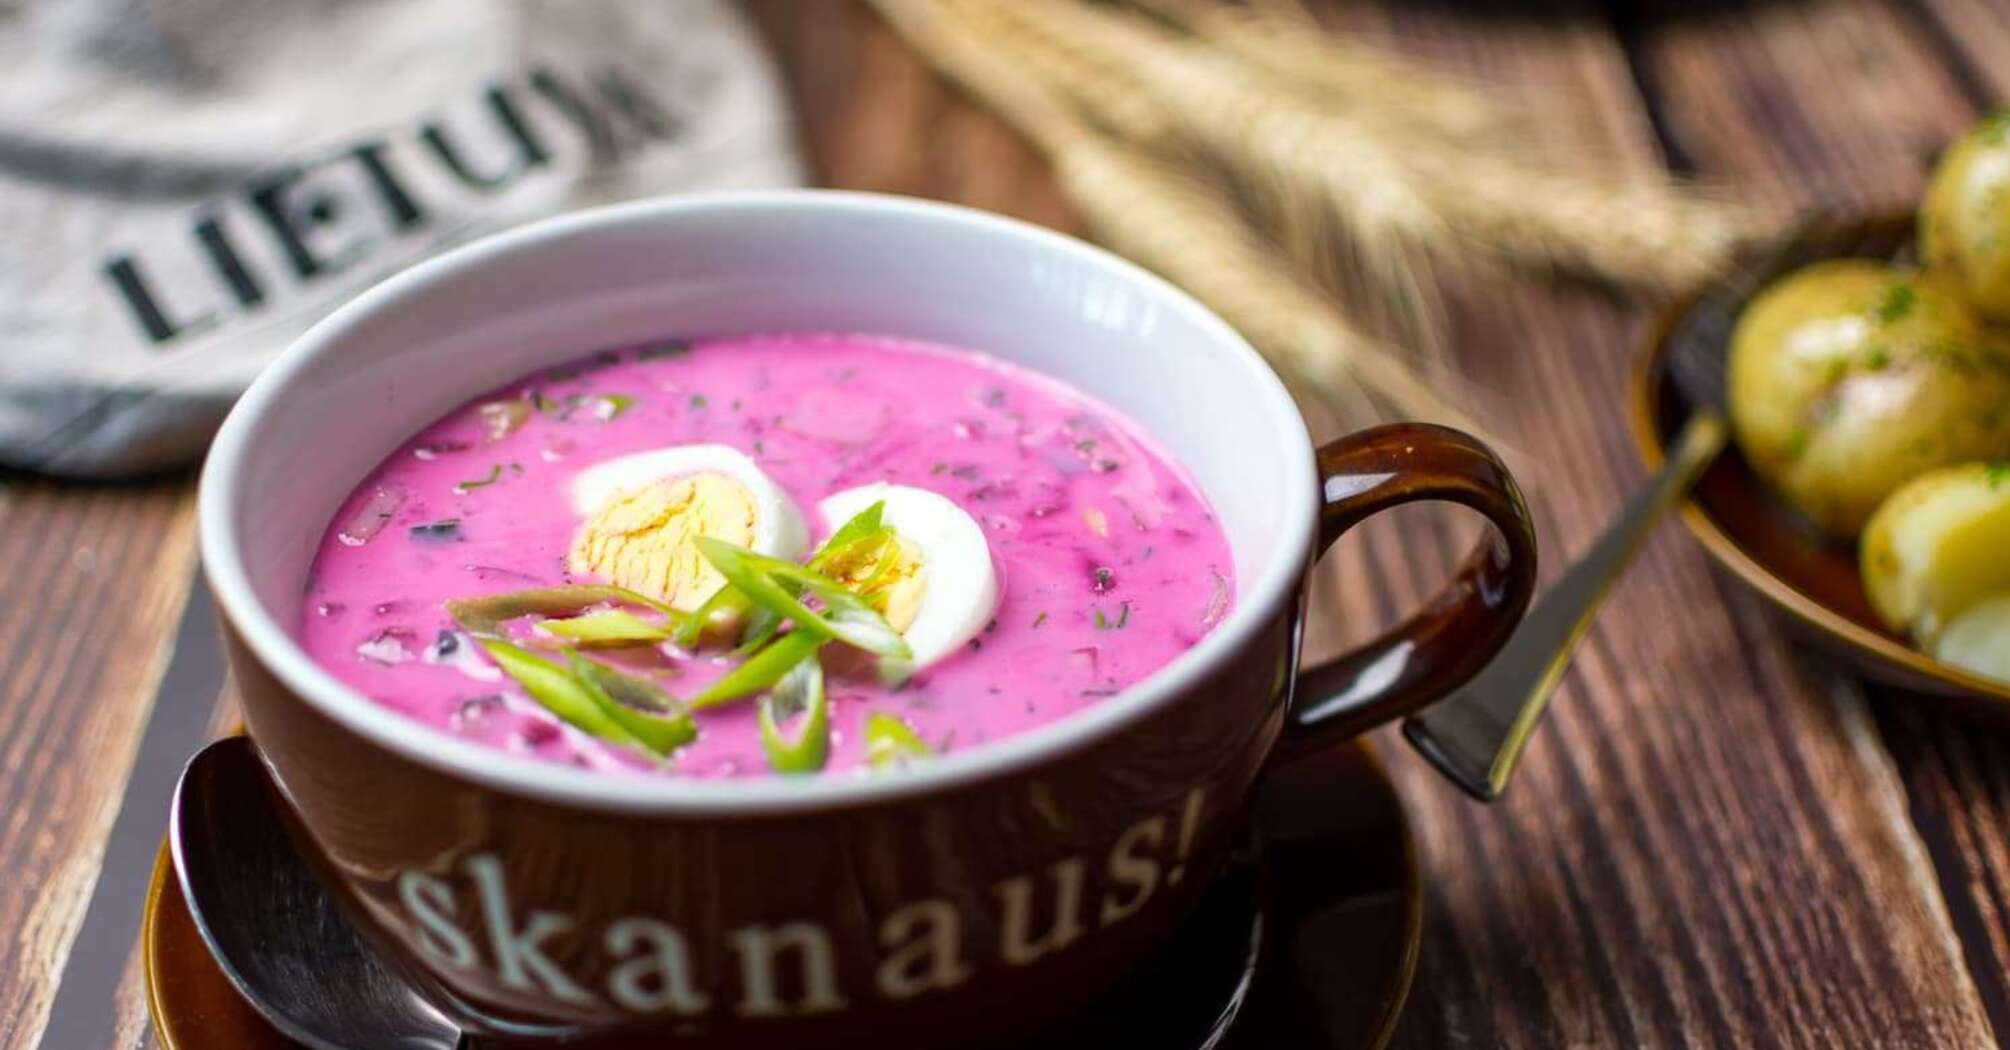 Refreshing cold borscht: the perfect dish for hot days